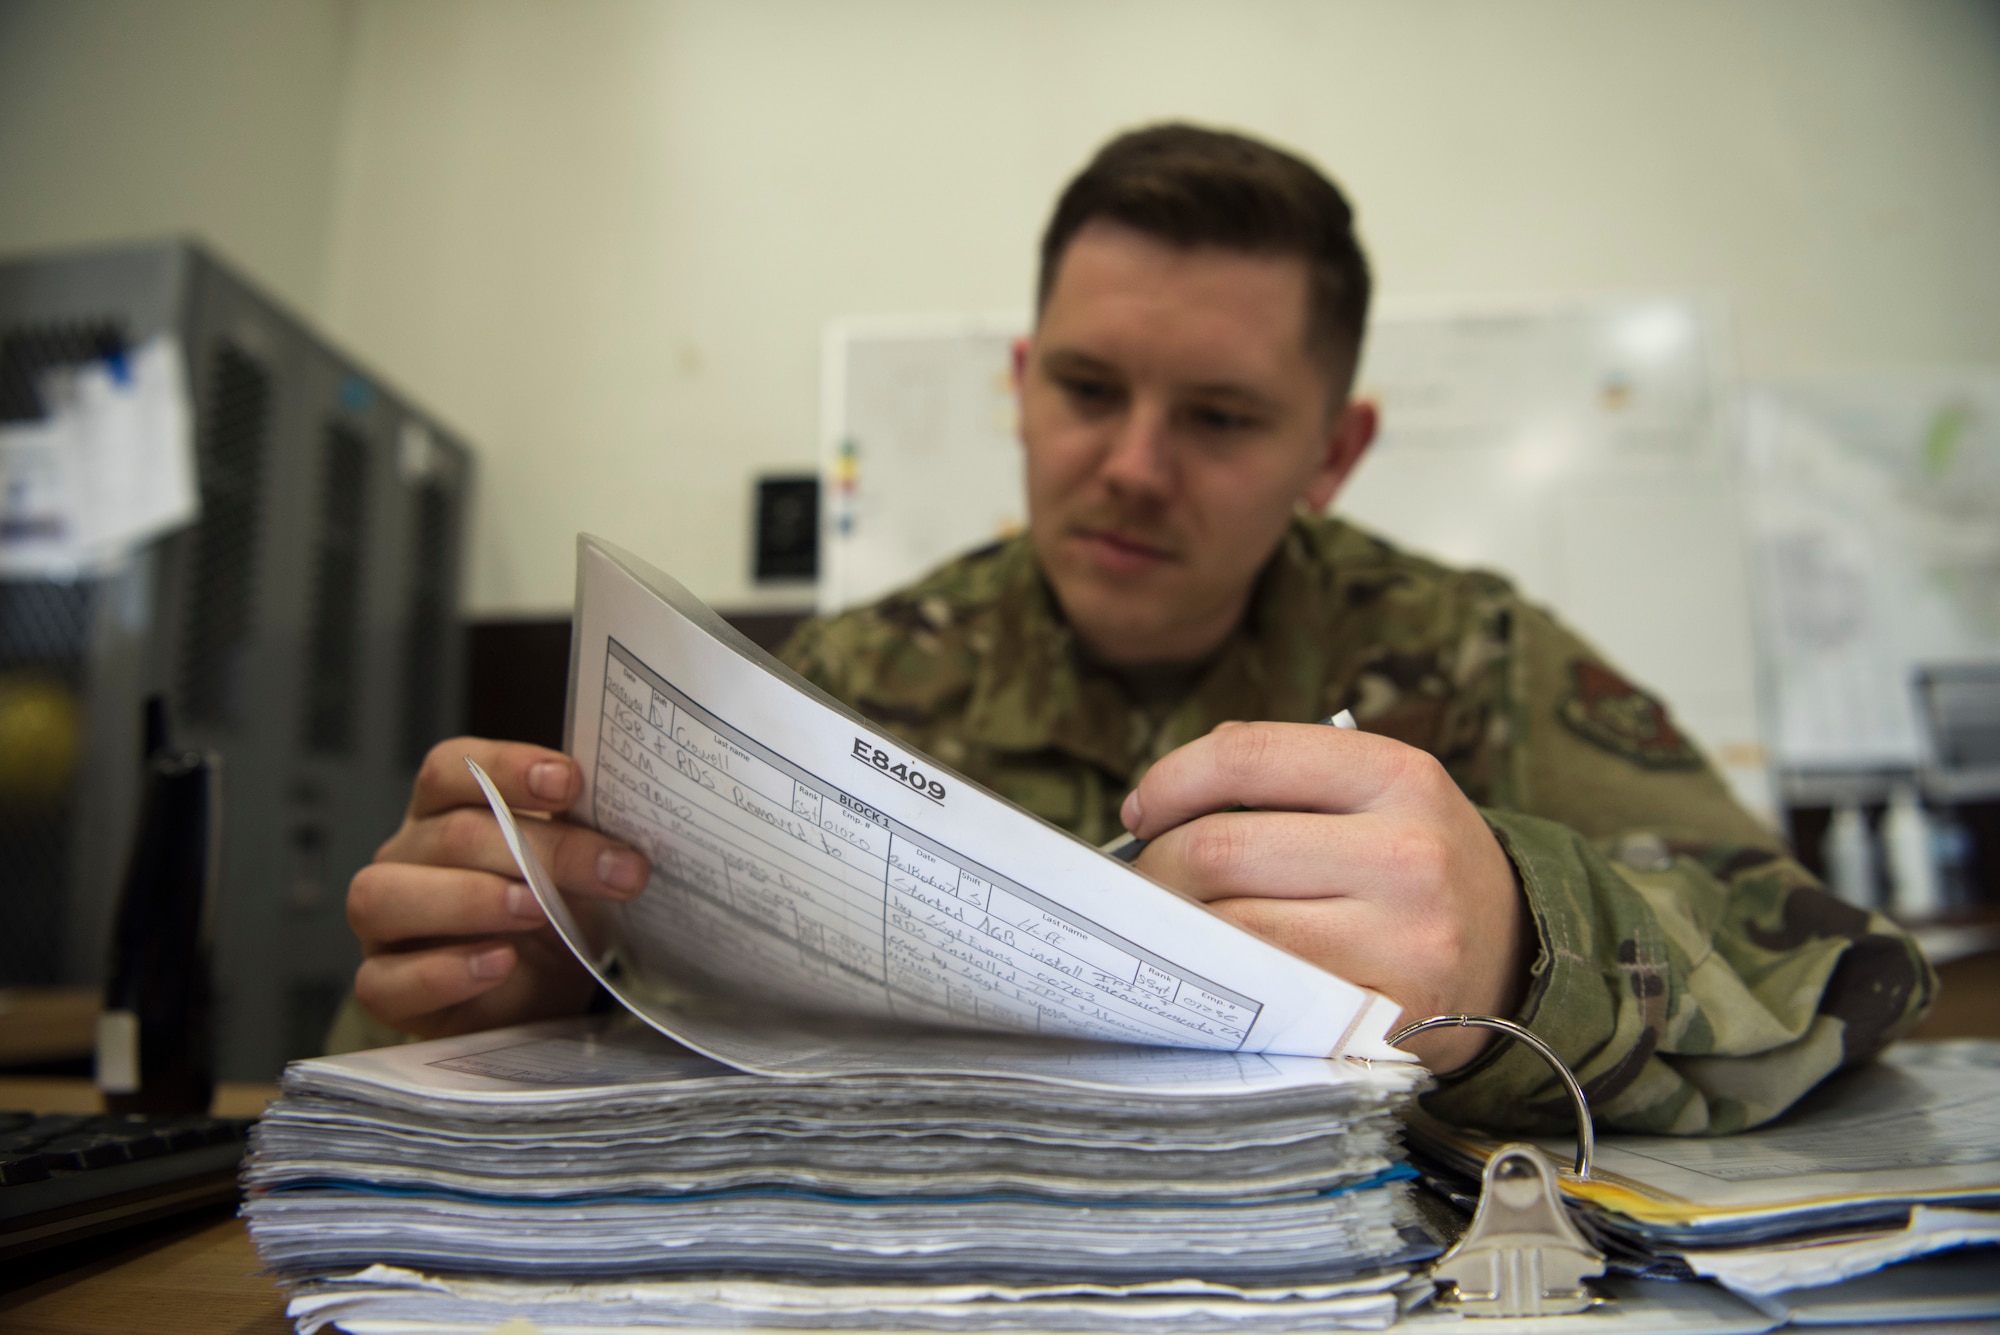 U.S. Air Force Tech. Sgt. James Huff, a 35th Maintenance Squadron aerospace propulsion craftsman, fills out paperwork at Misawa Air Base, Japan, July 16, 2019. The 35th MXS propulsions centralized repair facility broke the record of engines serviced in a month since 2006. (U.S. Air Force photo by Senior Airman Collette Brooks)